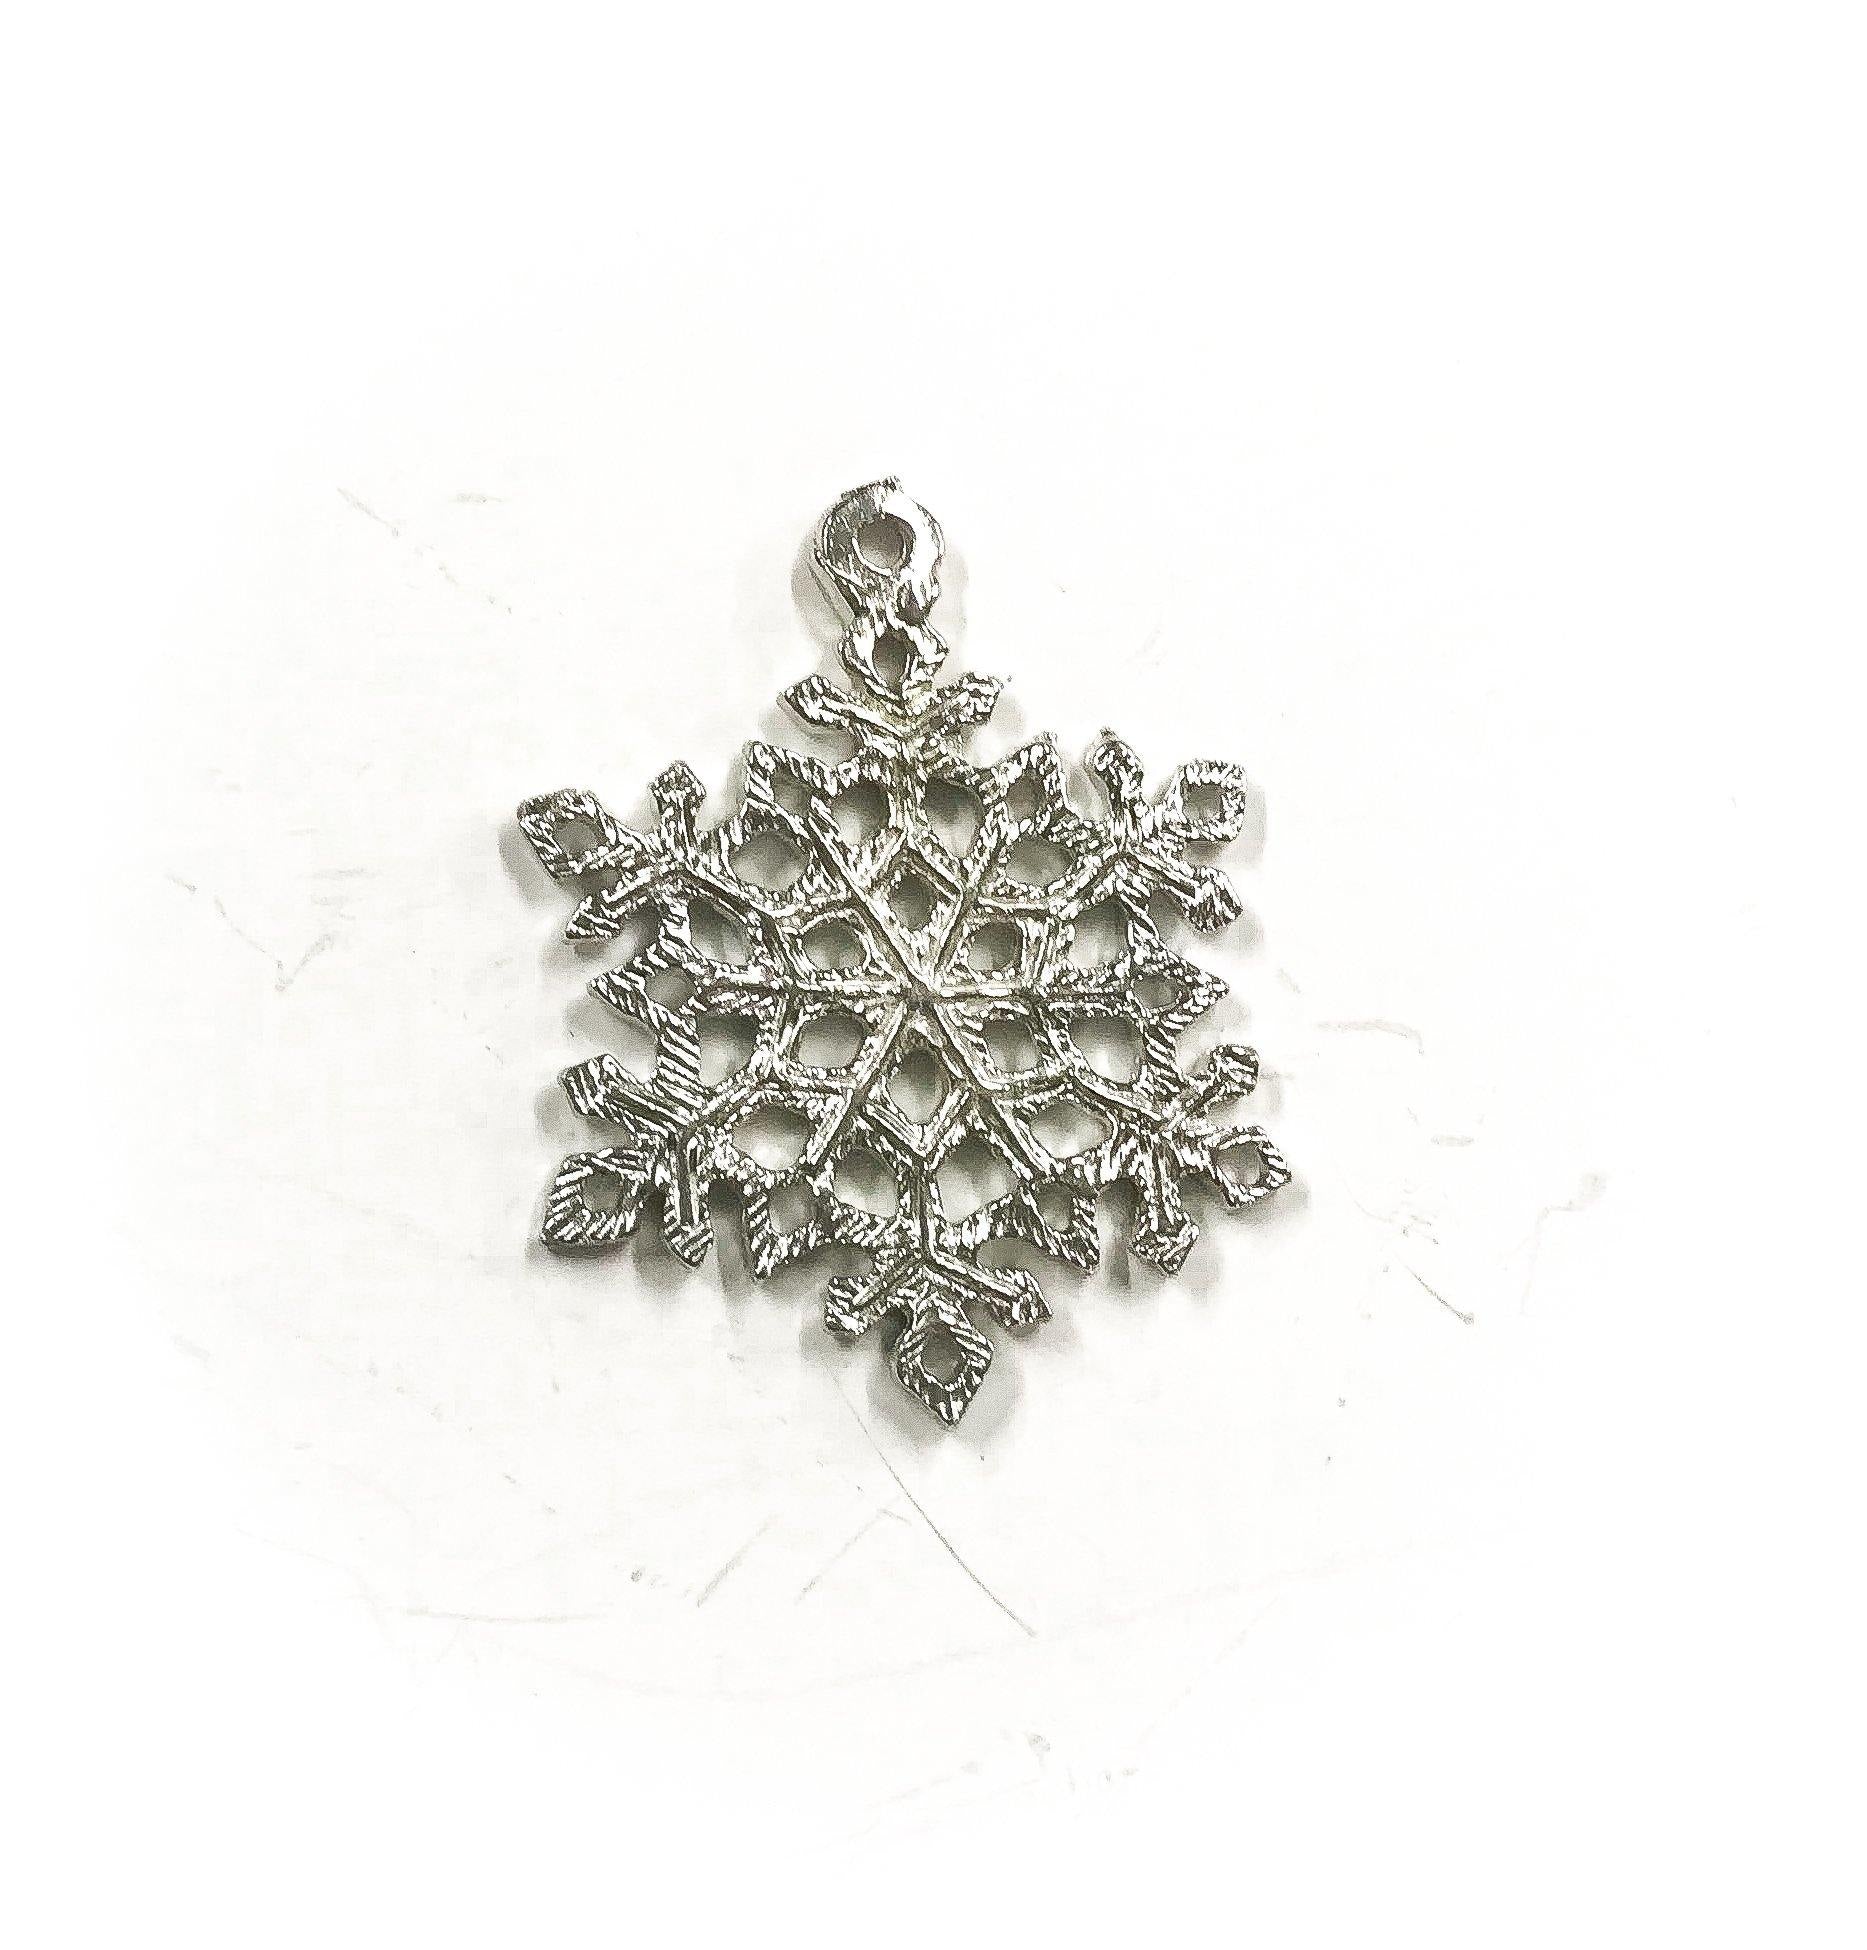 Handmade Snowflake Pewter Pendant Necklaces - House of Morgan Pewter